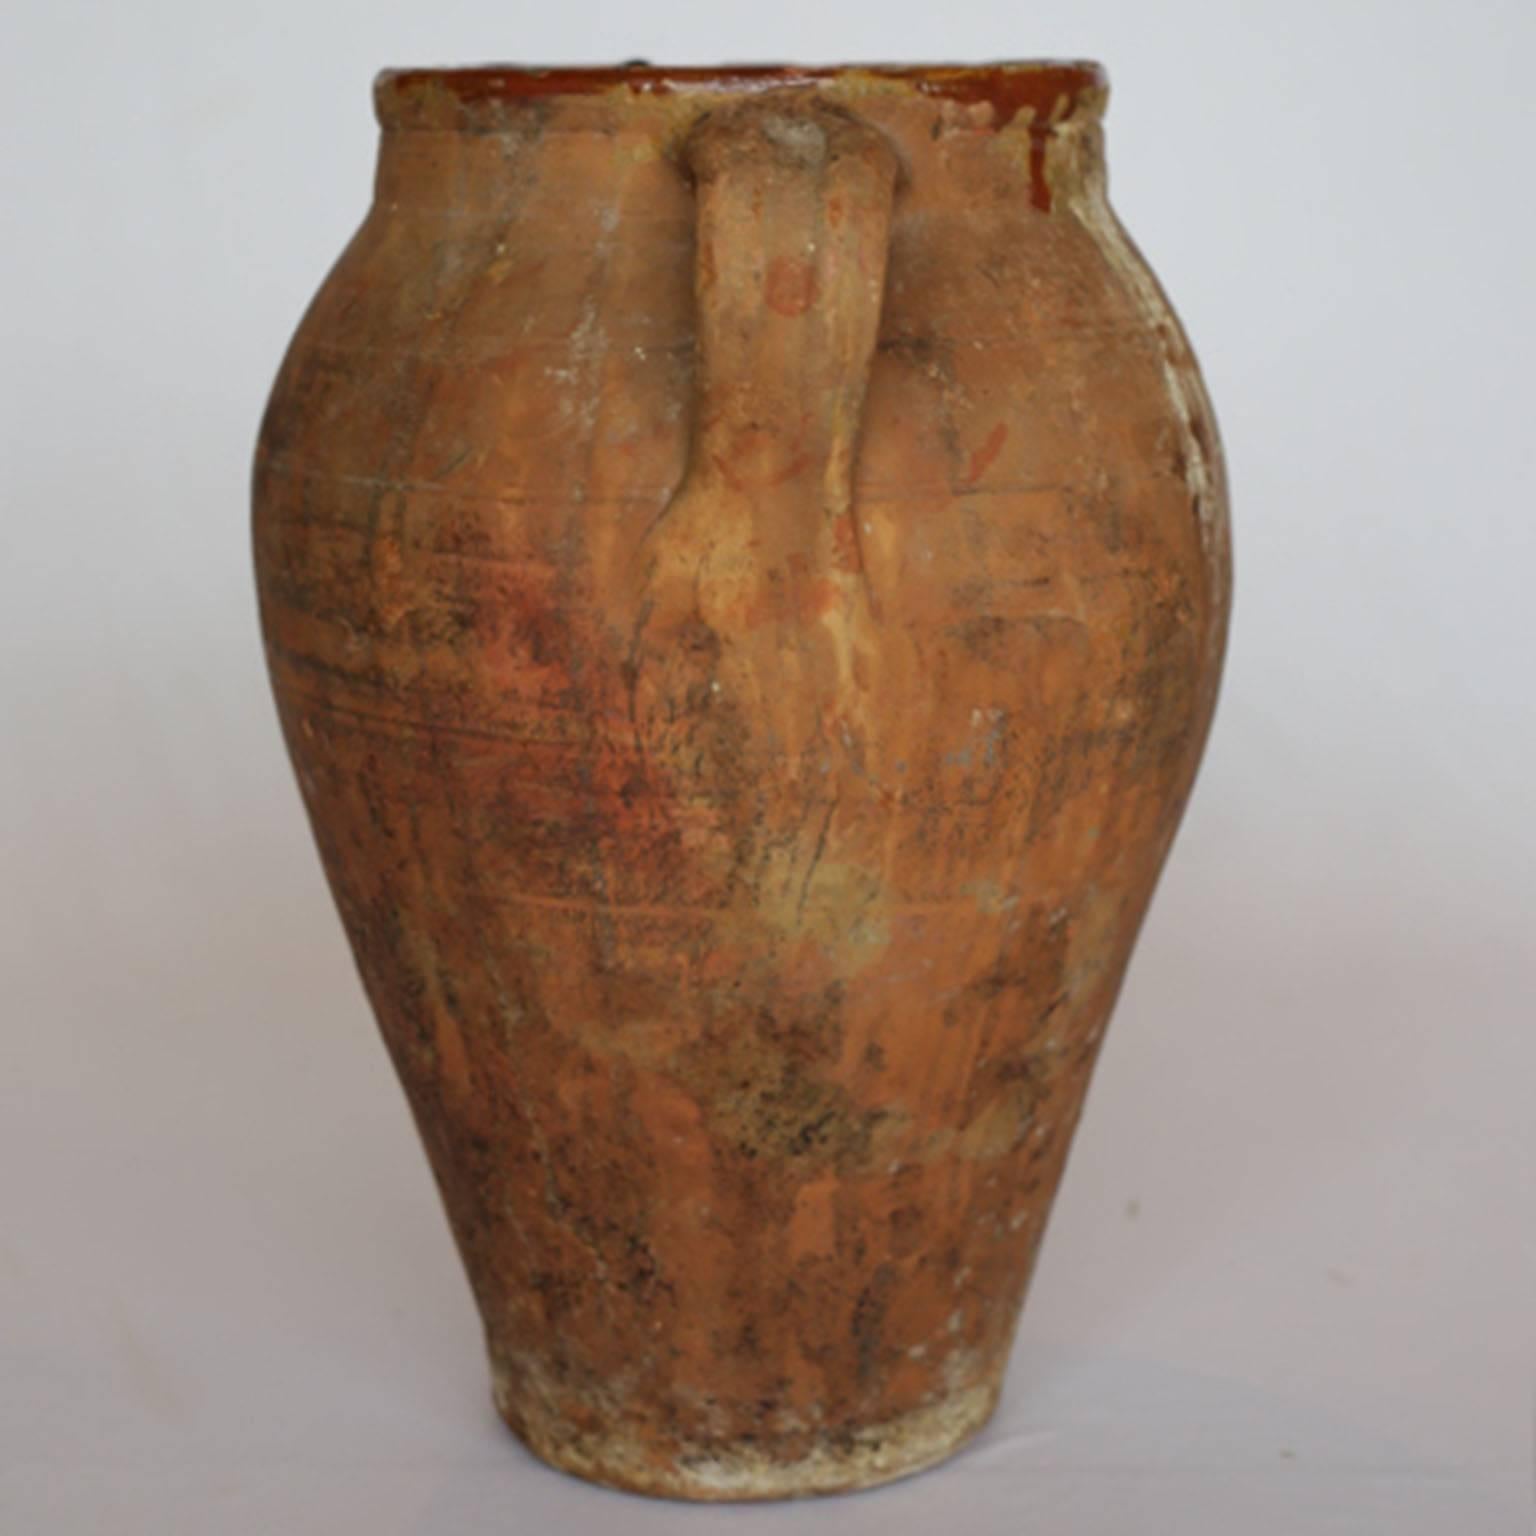 Large wide mouth semi-glazed terra cotta Italian olive jar. Glazing on the top rim.
Chips on the rim. Large cracks on both sides that appear to have been repaired sometime in its lifetime. Structurally sound though. Unsure if it can hold water.